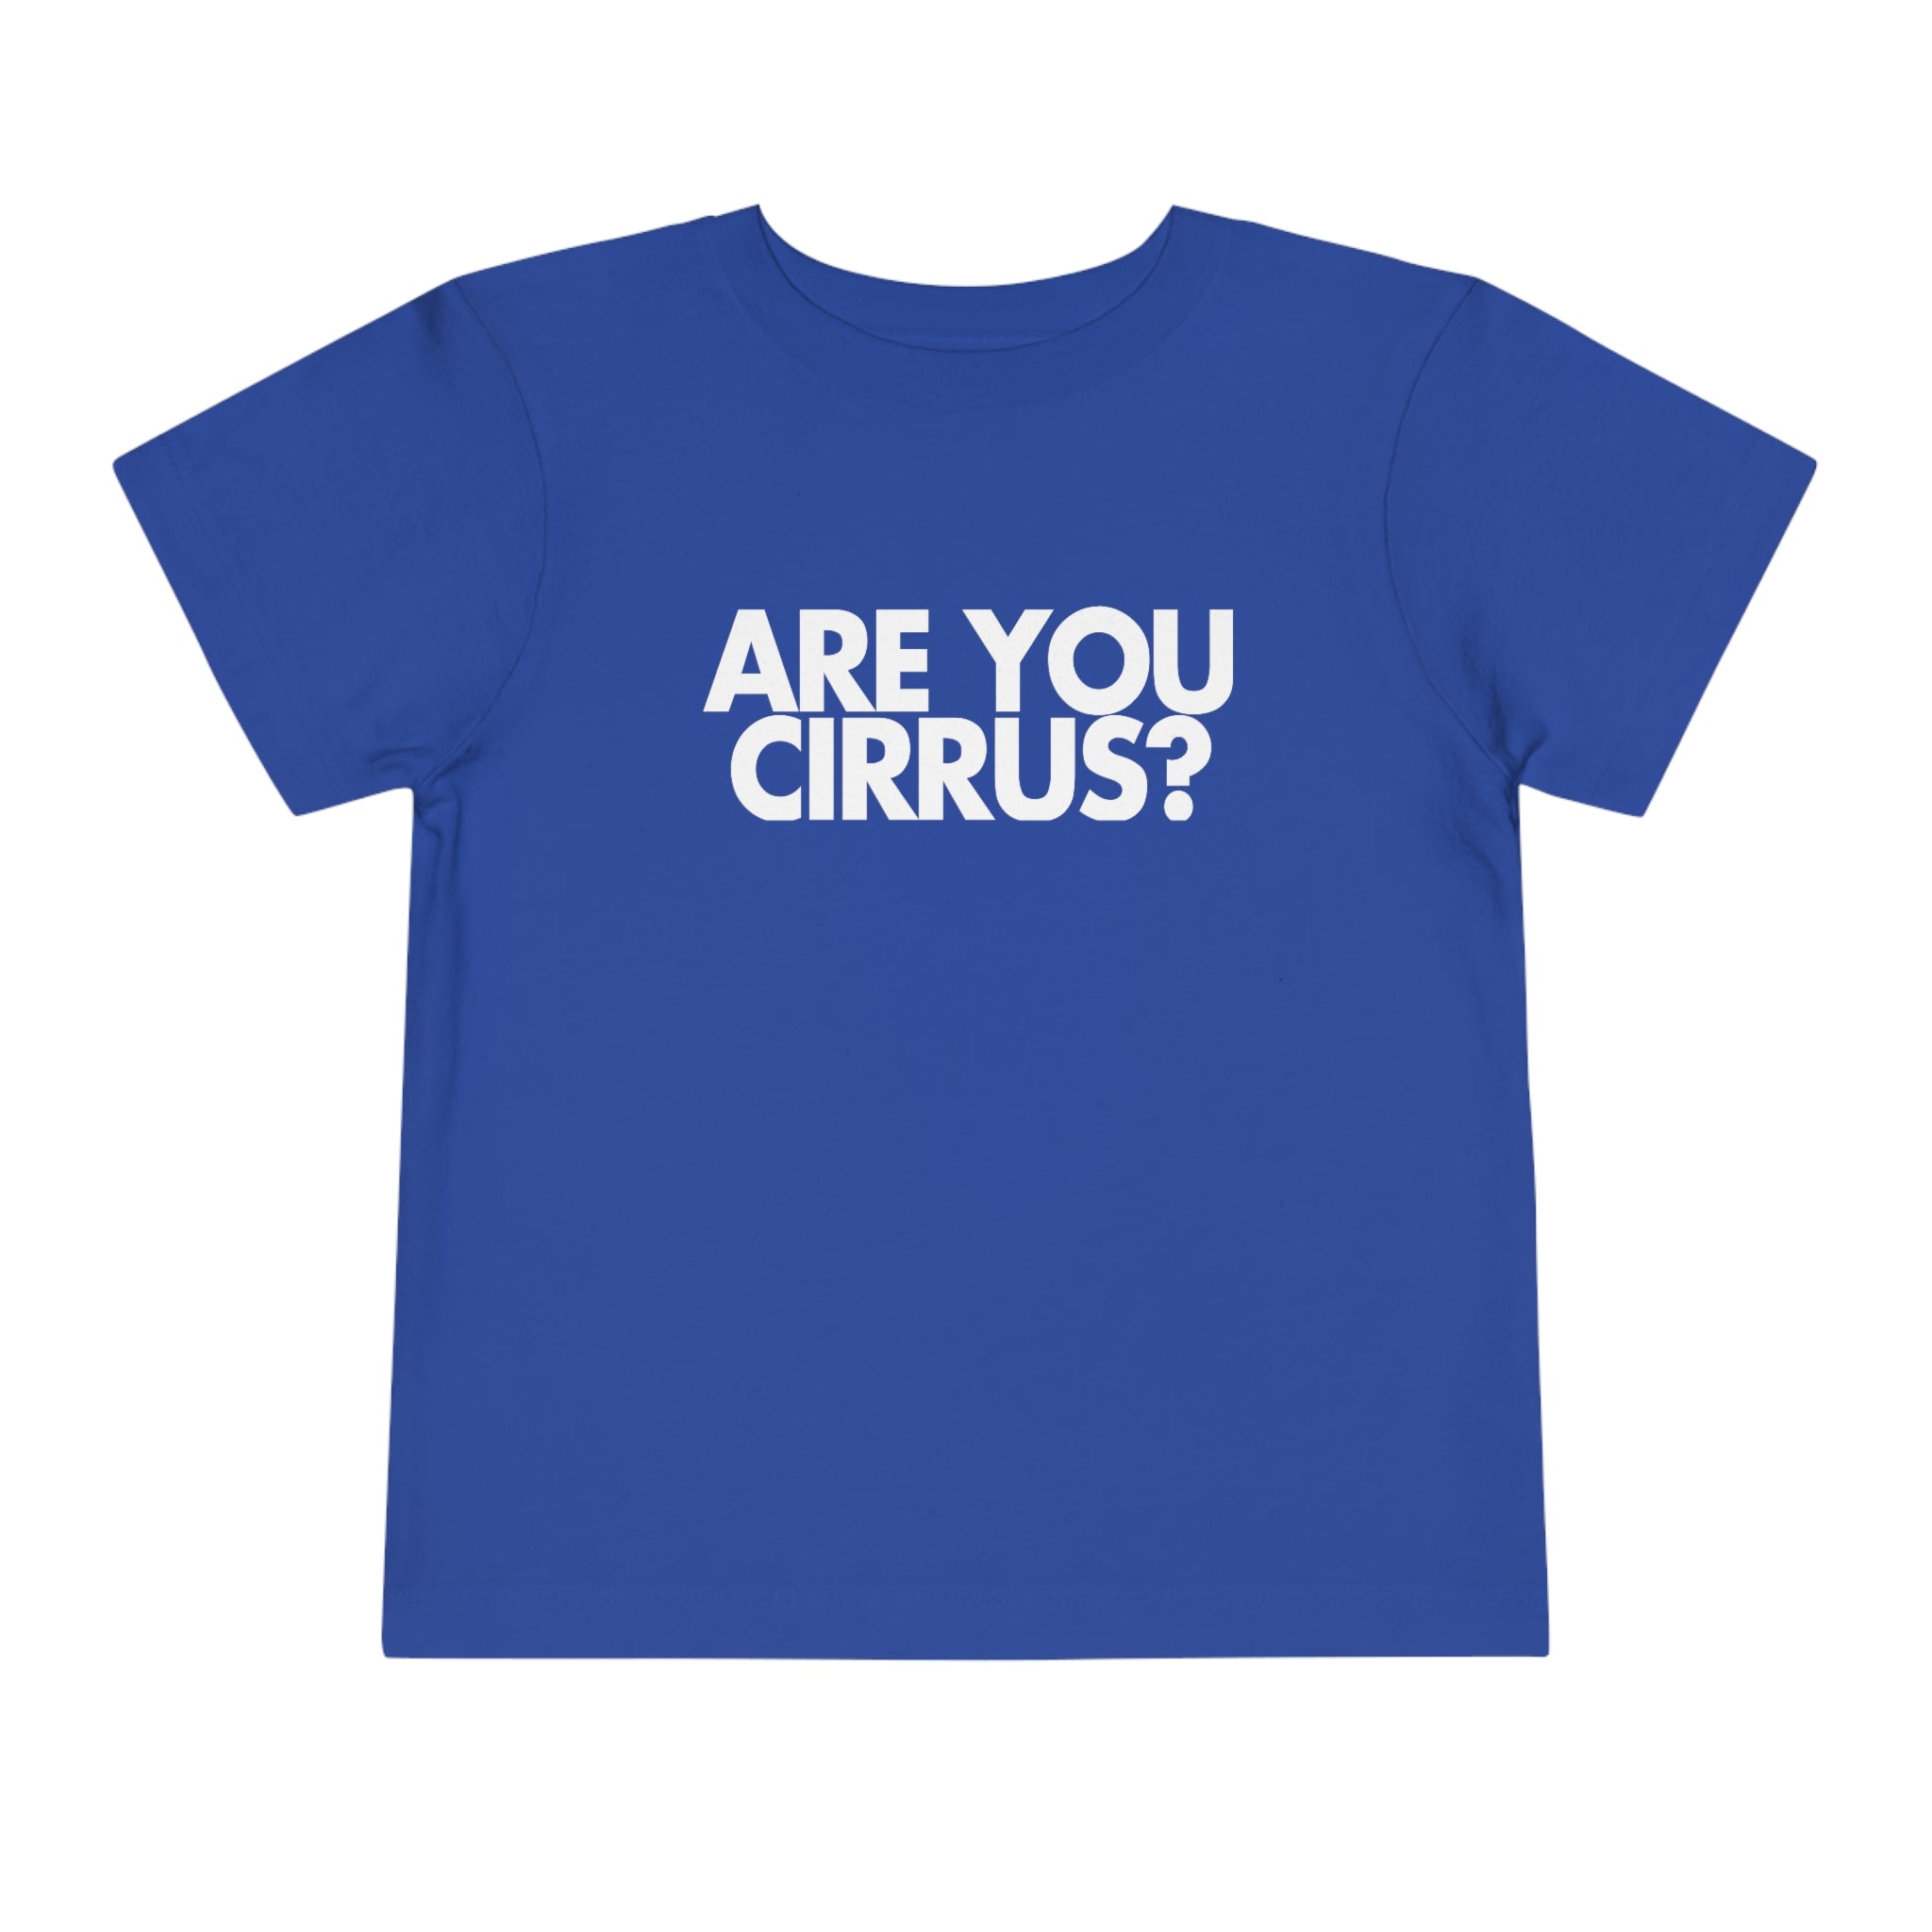 Are You Cirrus? Toddler Tee 